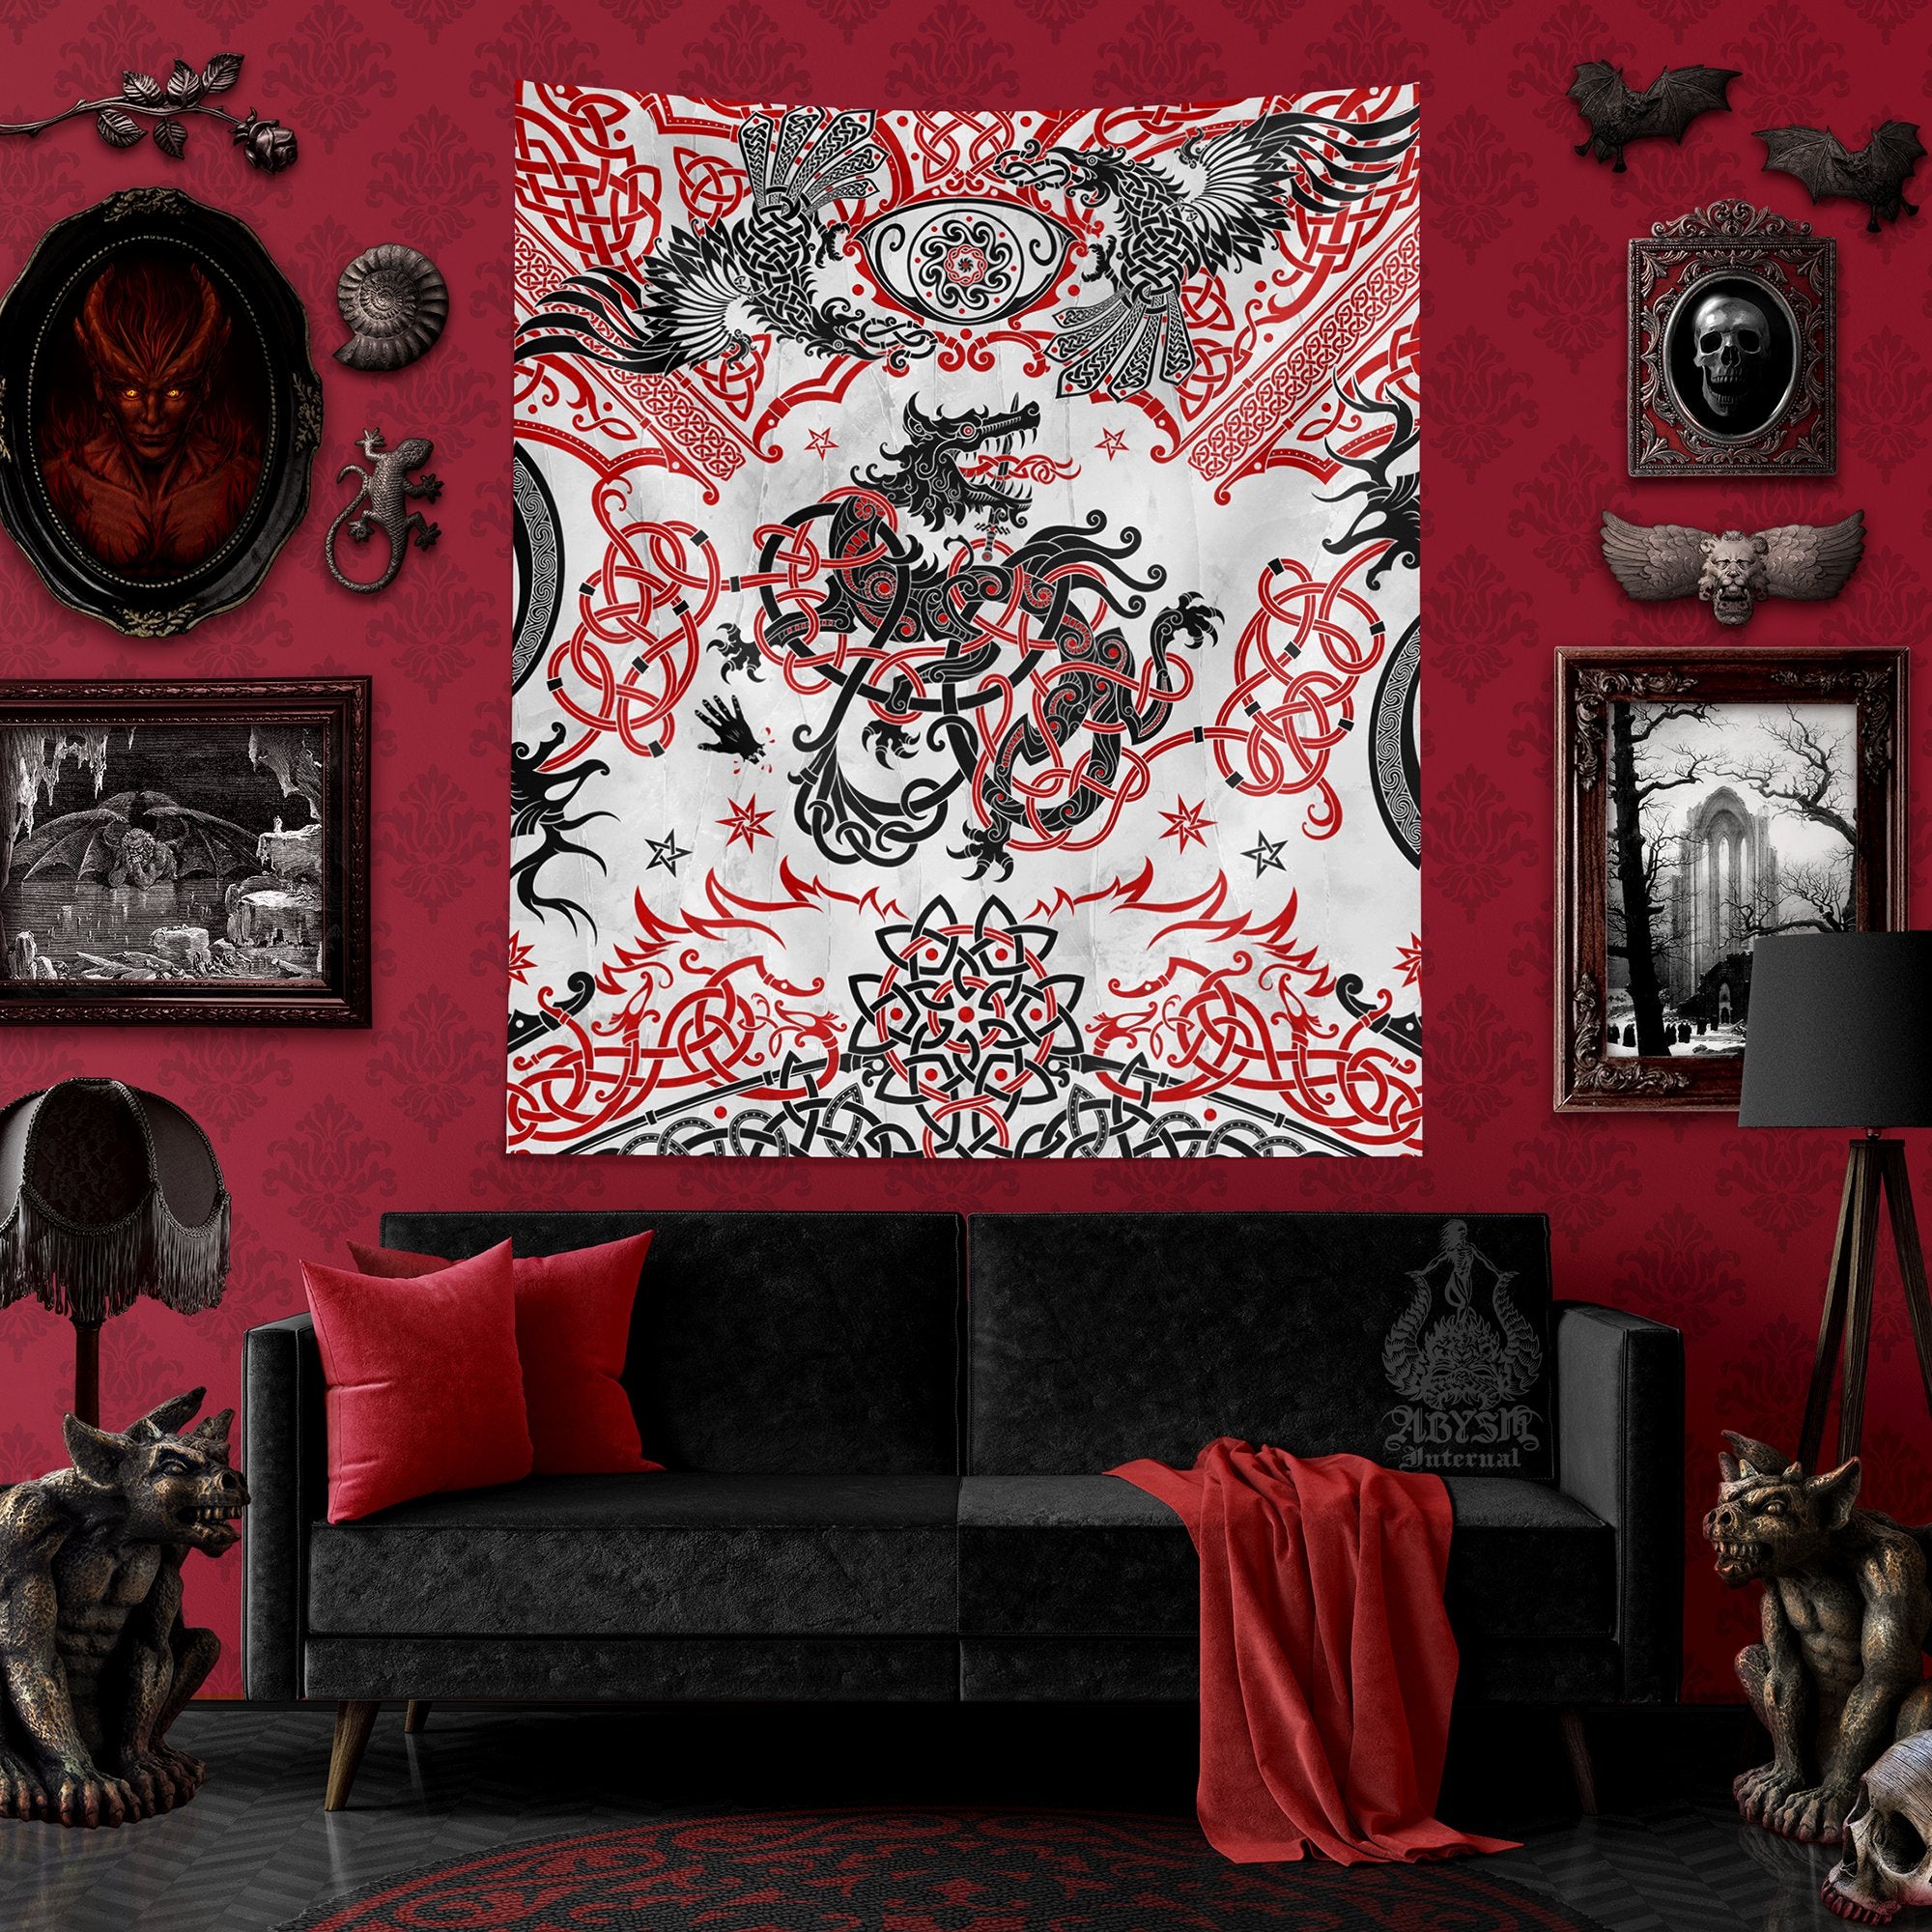 Nordic Art Tapestry, Norse Mythology Wall Hanging, Viking Home Decor, Fenrir Wolf, Vertical Print - Black Red White - Abysm Internal